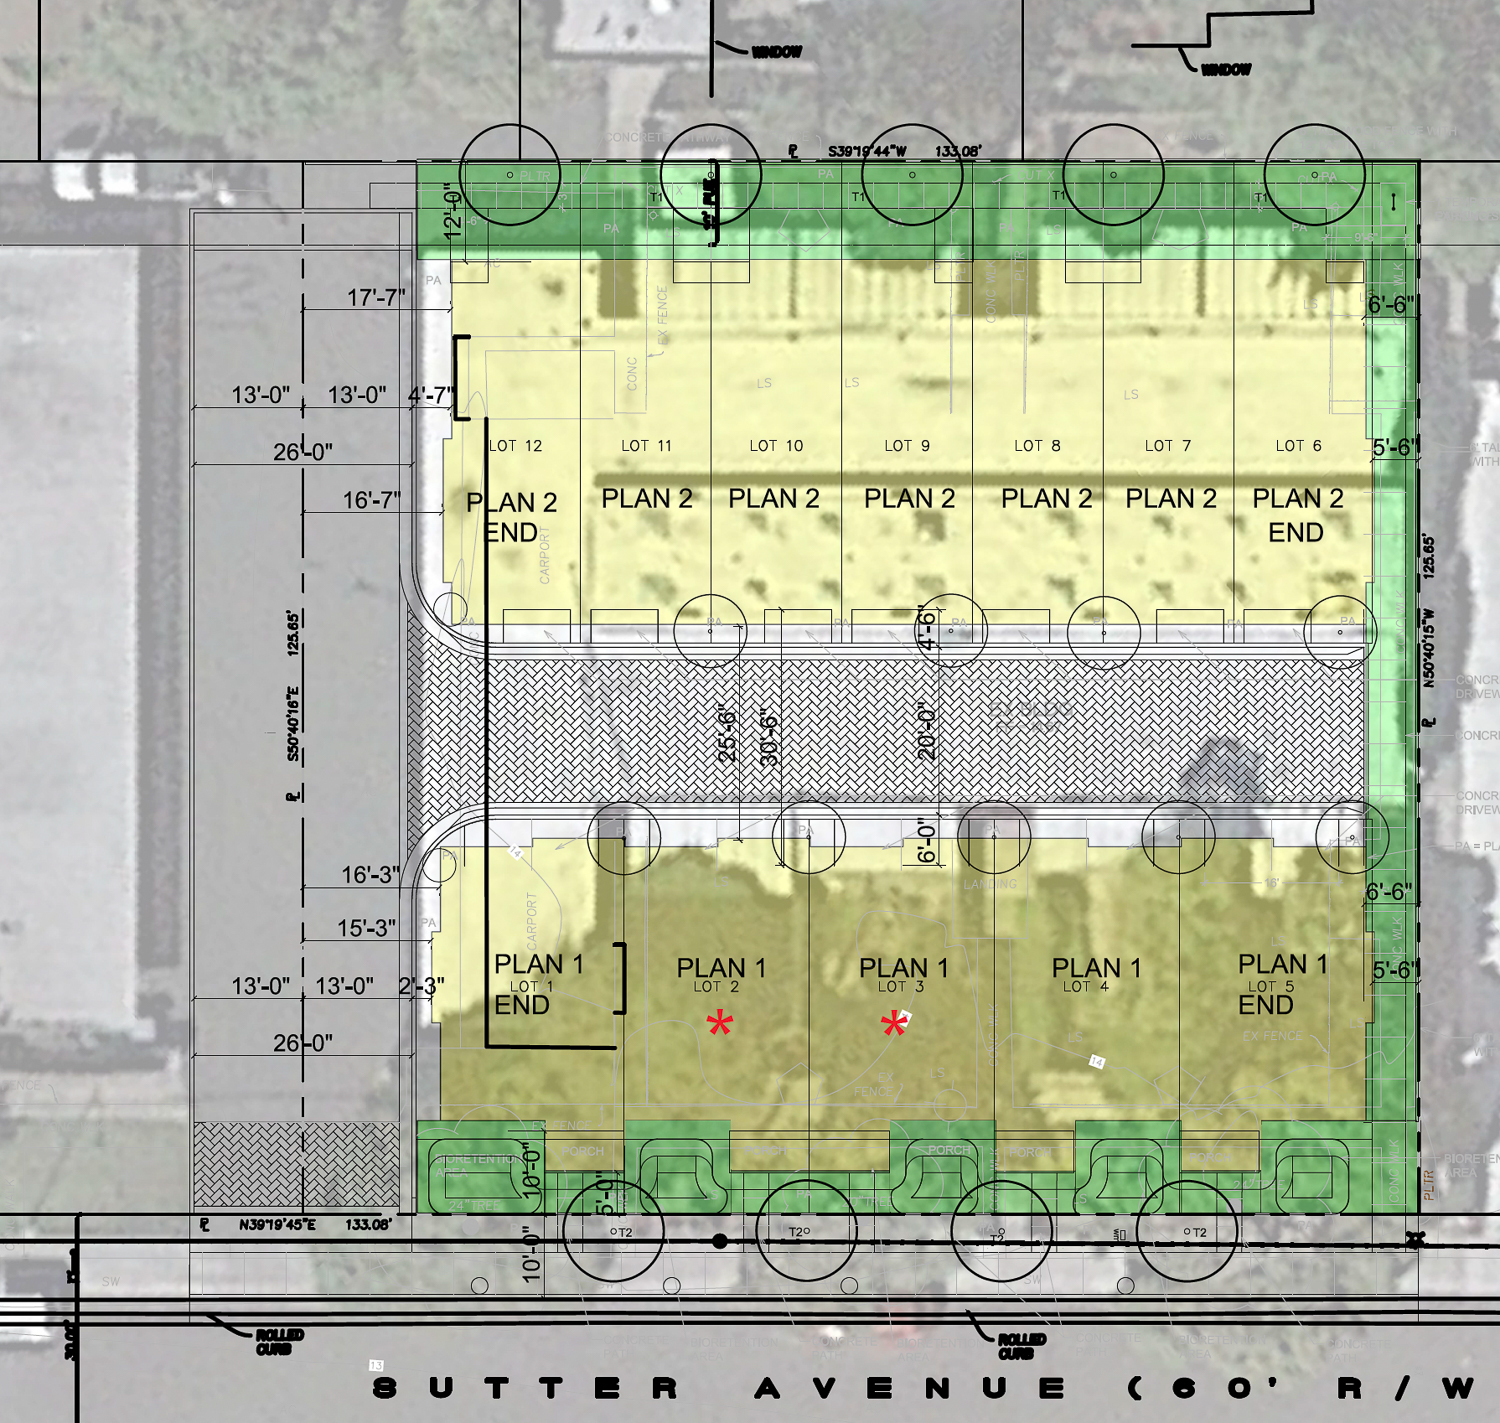 739 Sutter Avenue site map, illustration by DAHLIN Group